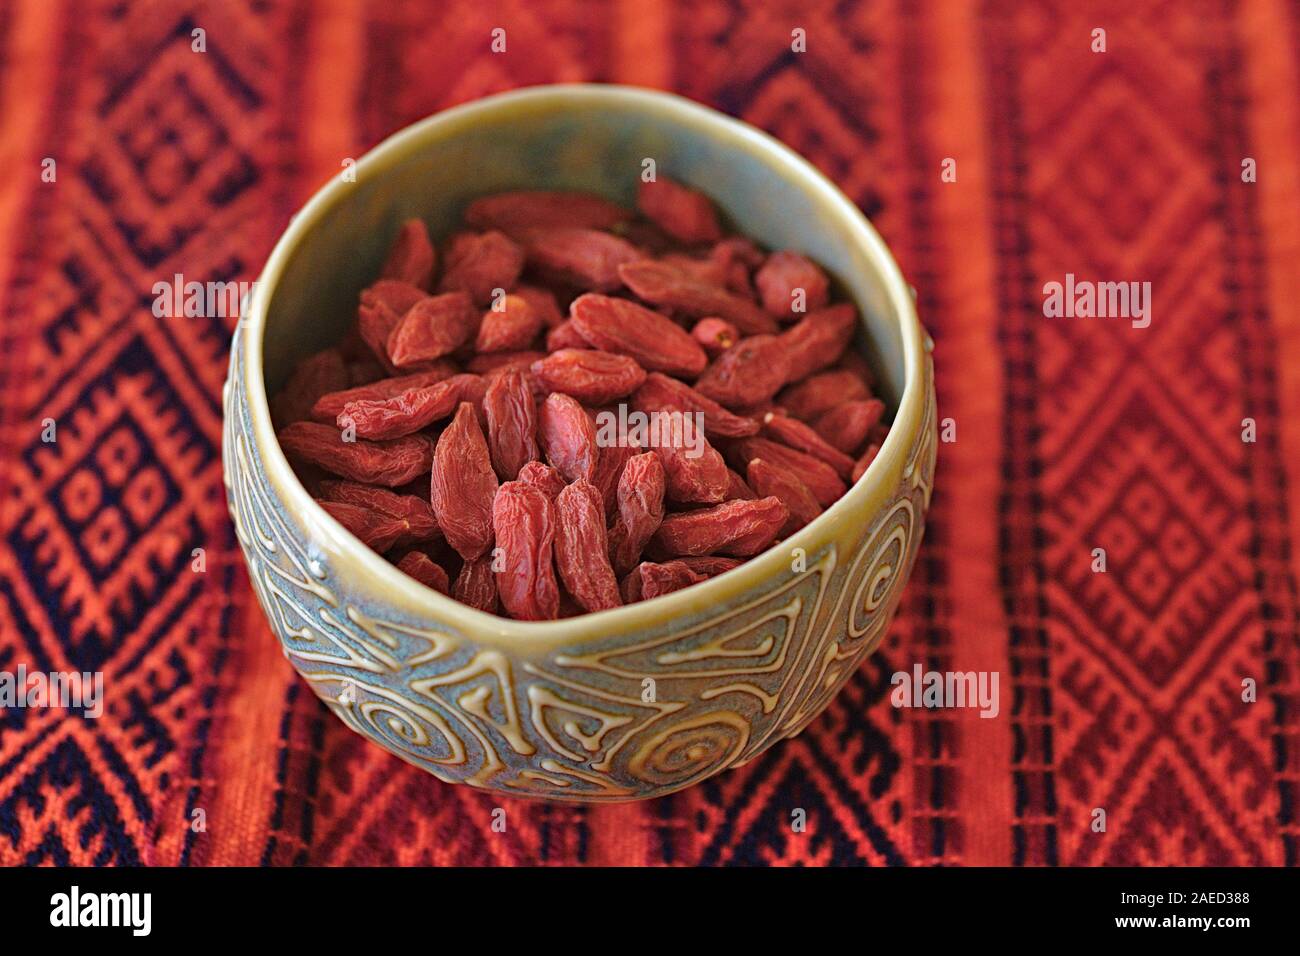 Dried Goji Berries (Lycium barbarum) in a small green ceramic bowl on a bright red tablecloth. Stock Photo